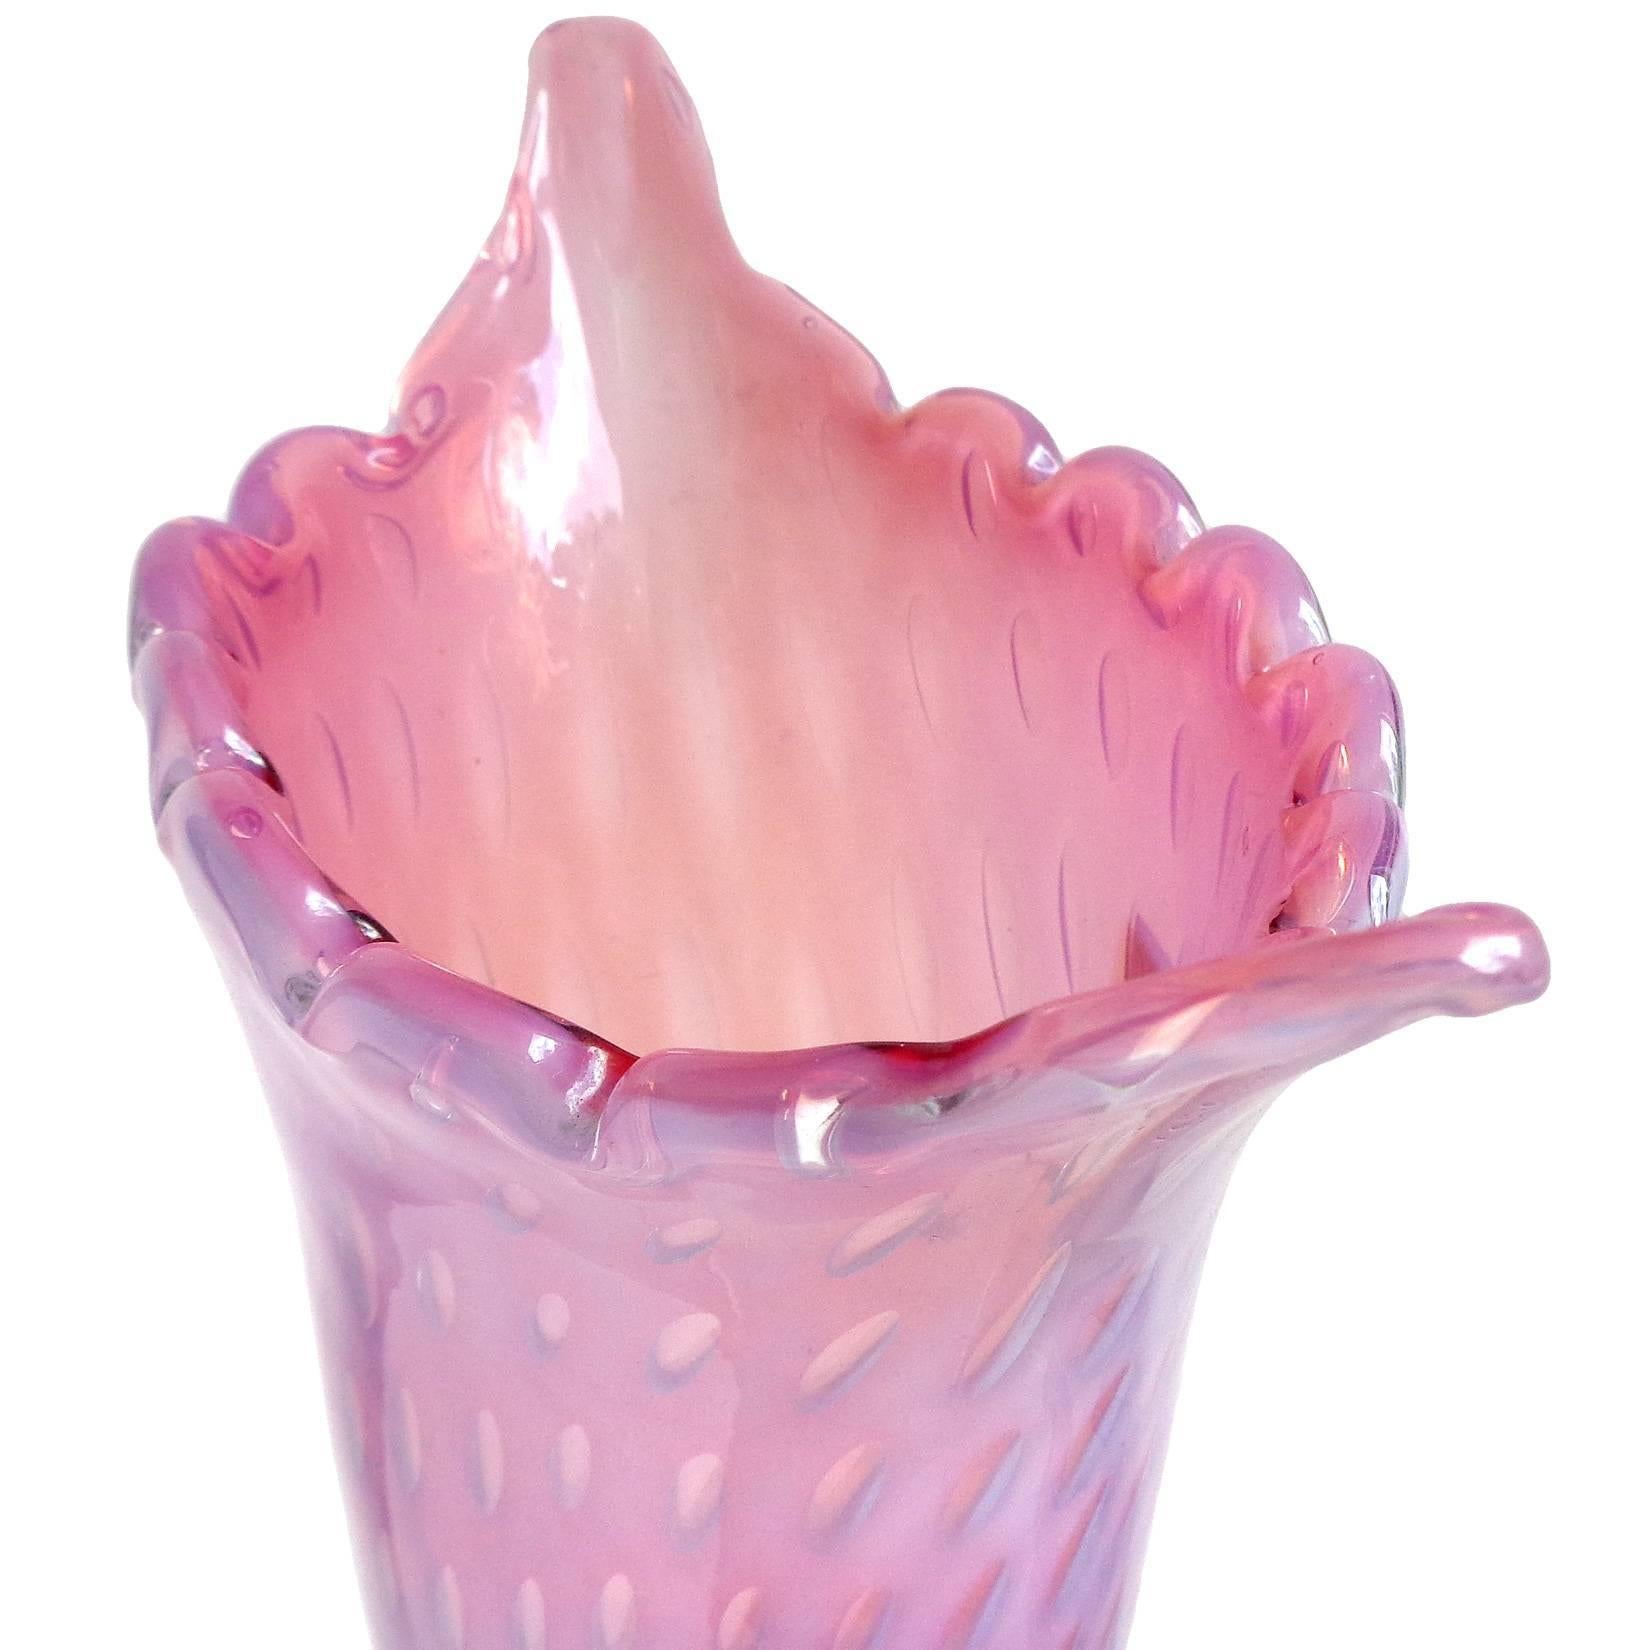 Beautiful vintage Murano hand blown opalescent pink and controlled bubbles Italian art glass flower vase. Documented to the Fratelli Toso company. The outside opal color of the vase changes depending on the light, from light pink, to a lavender /